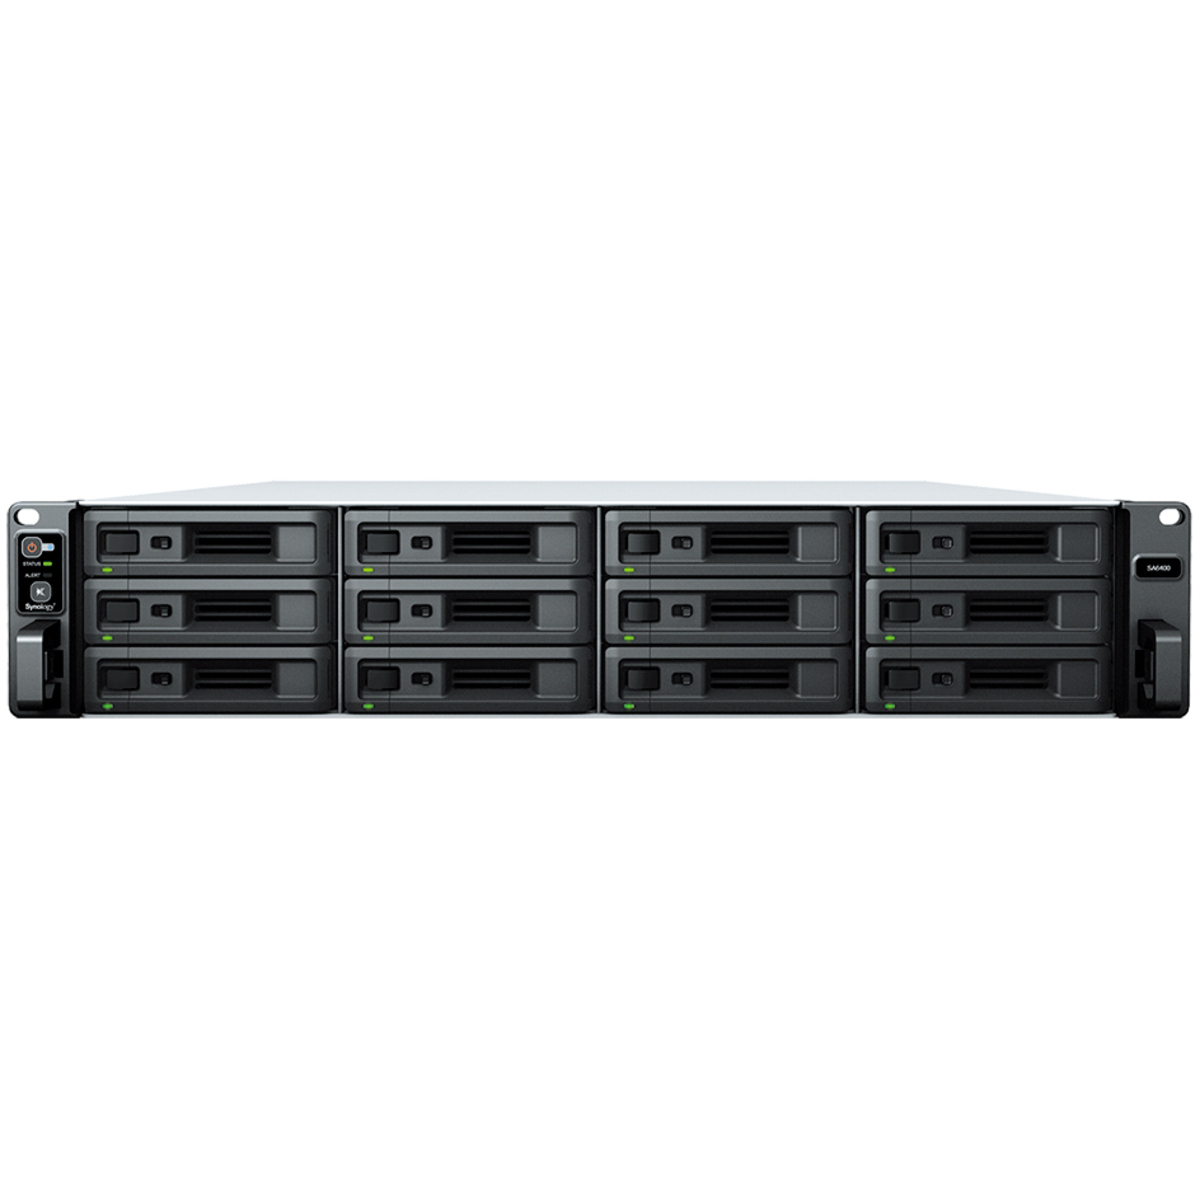 Synology RackStation SA6400 48tb 12-Bay RackMount Large Business / Enterprise NAS - Network Attached Storage Device 12x4tb Seagate IronWolf Pro ST4000NE001 3.5 7200rpm SATA 6Gb/s HDD NAS Class Drives Installed - Burn-In Tested RackStation SA6400